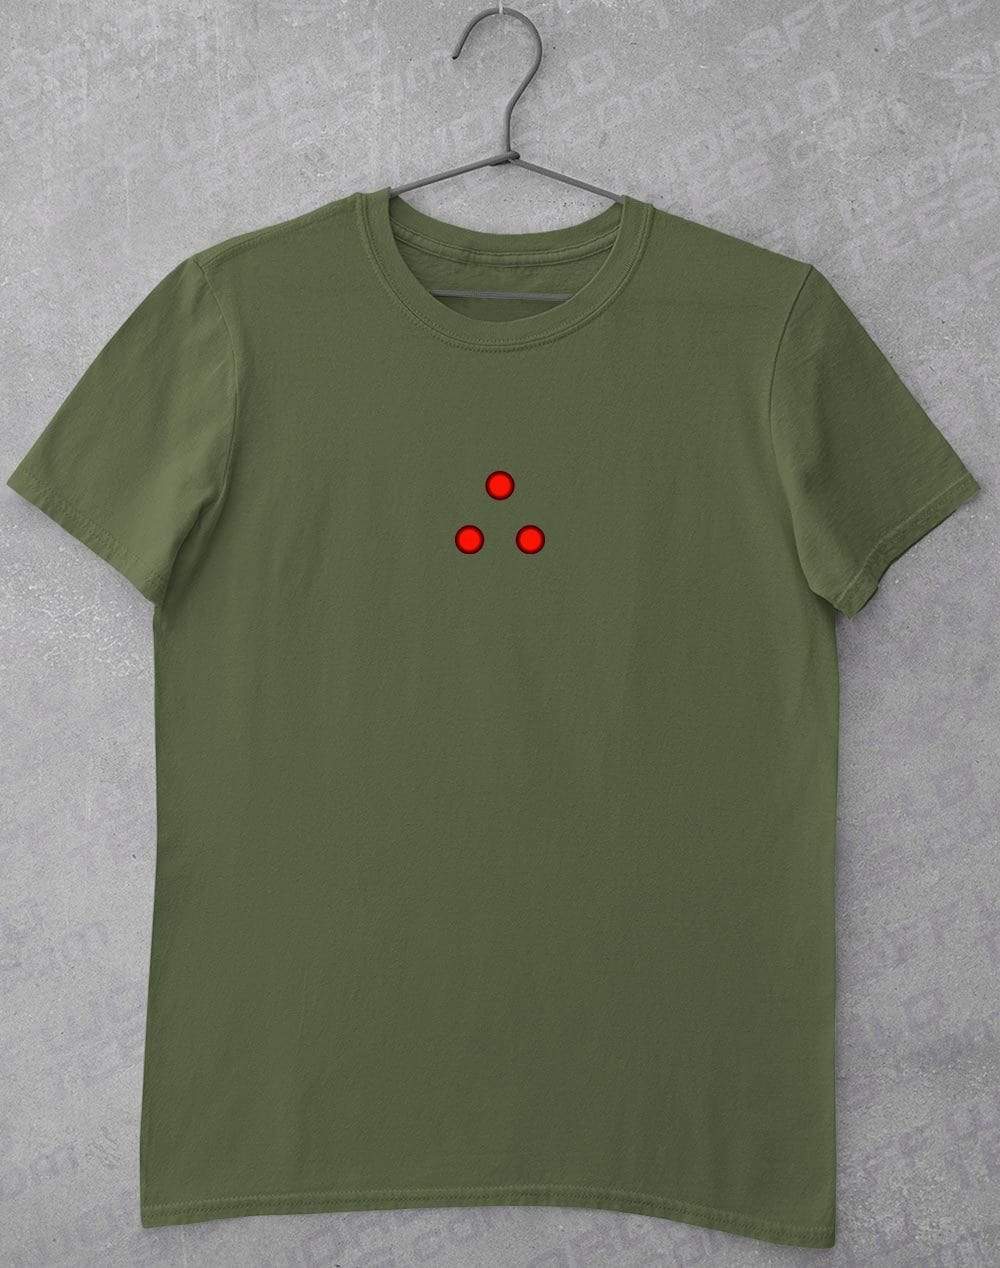 Tri Laser Sight T-Shirt S / Military Green  - Off World Tees